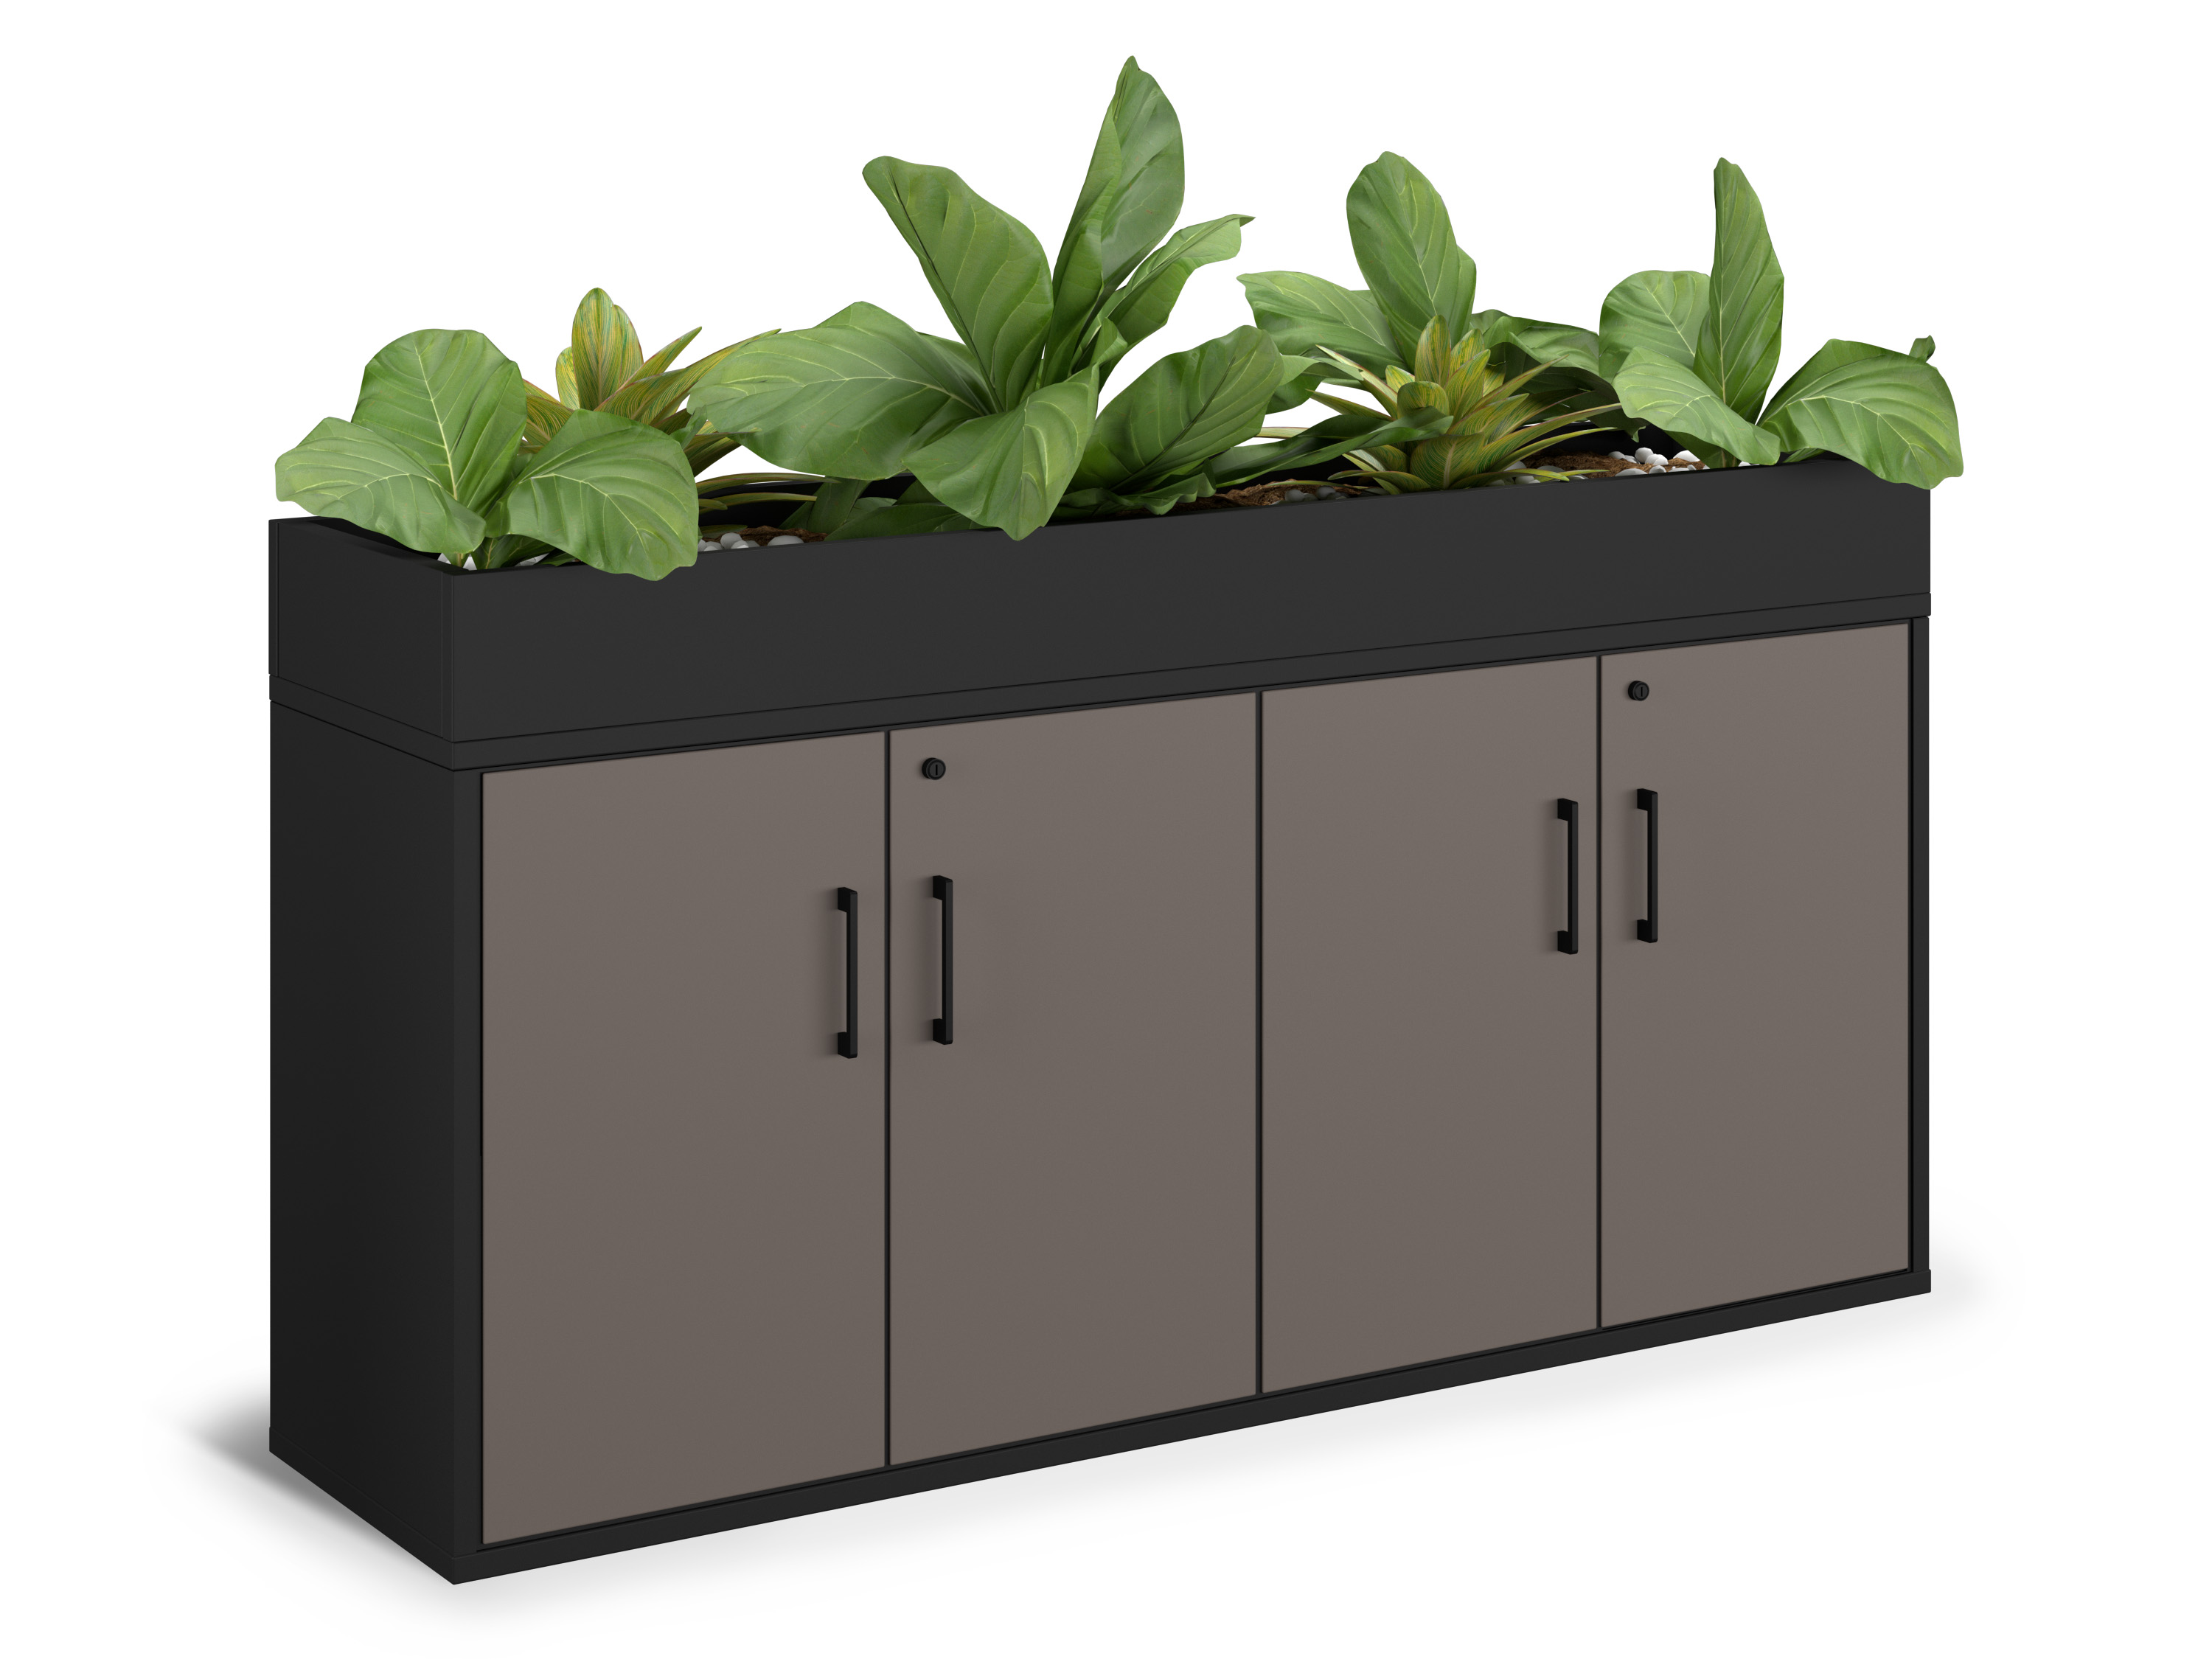 WS - End of Desk - Cupboard with planter (Anthracite, Stone grey)